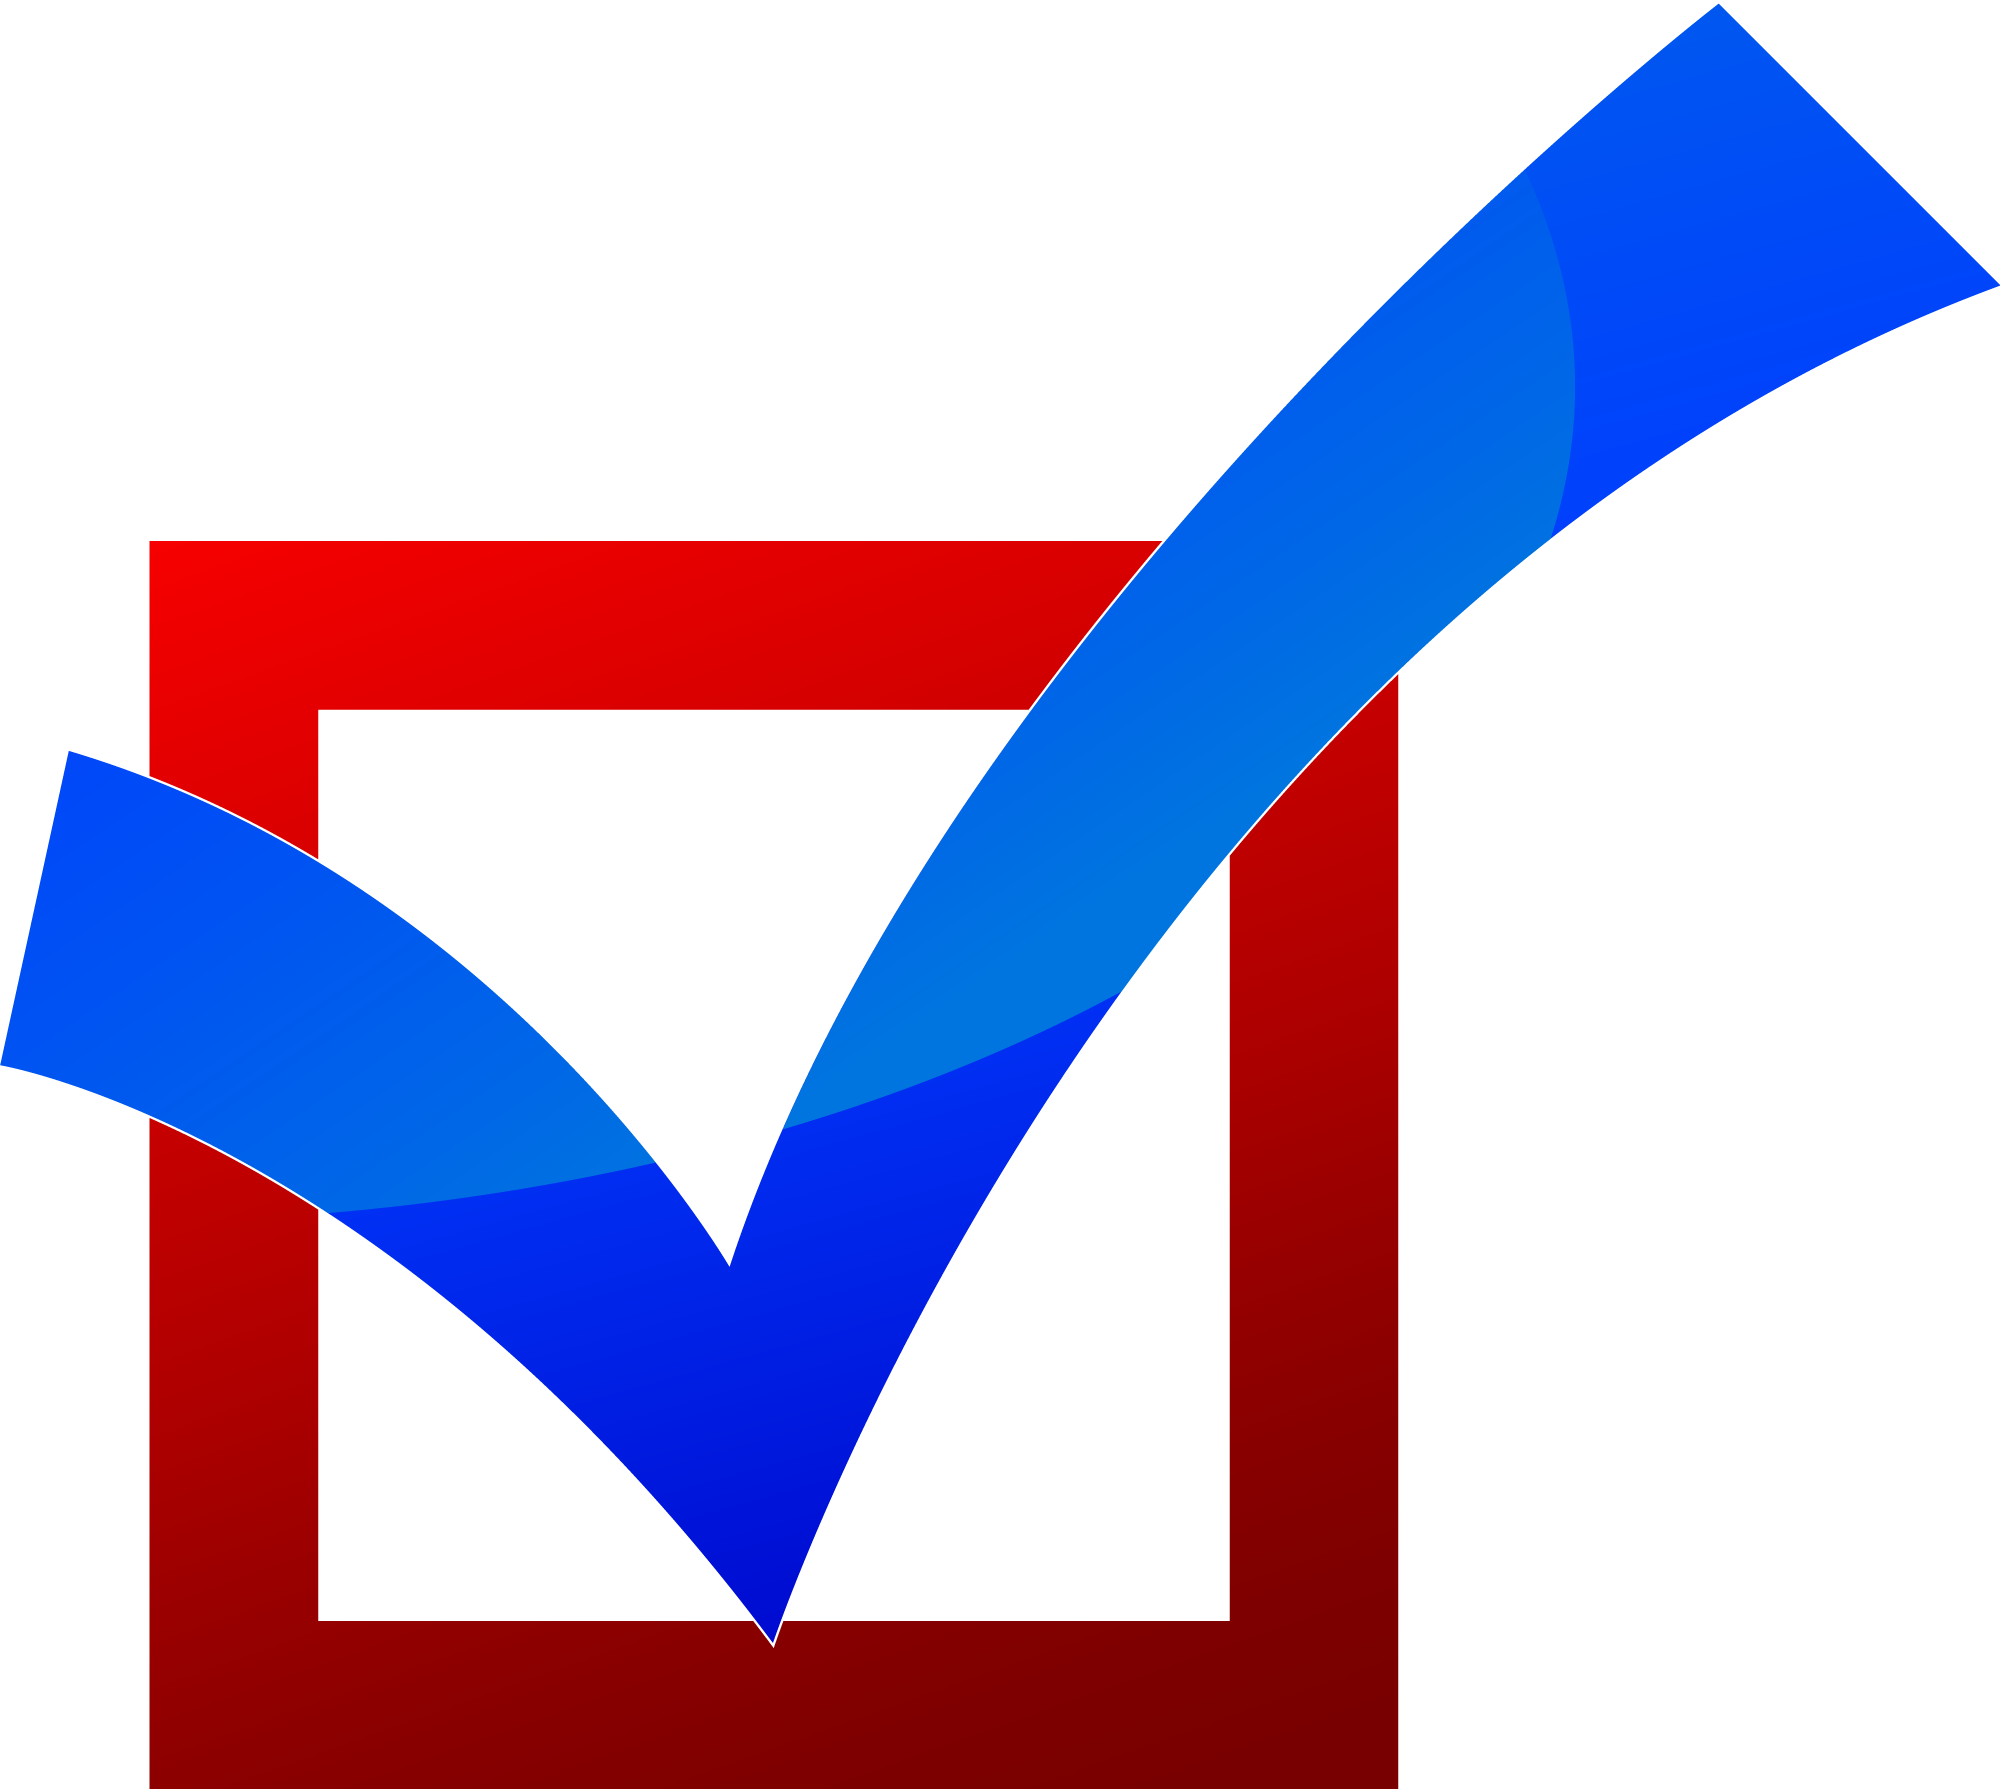 Red Check Mark In Box - ClipArt Best